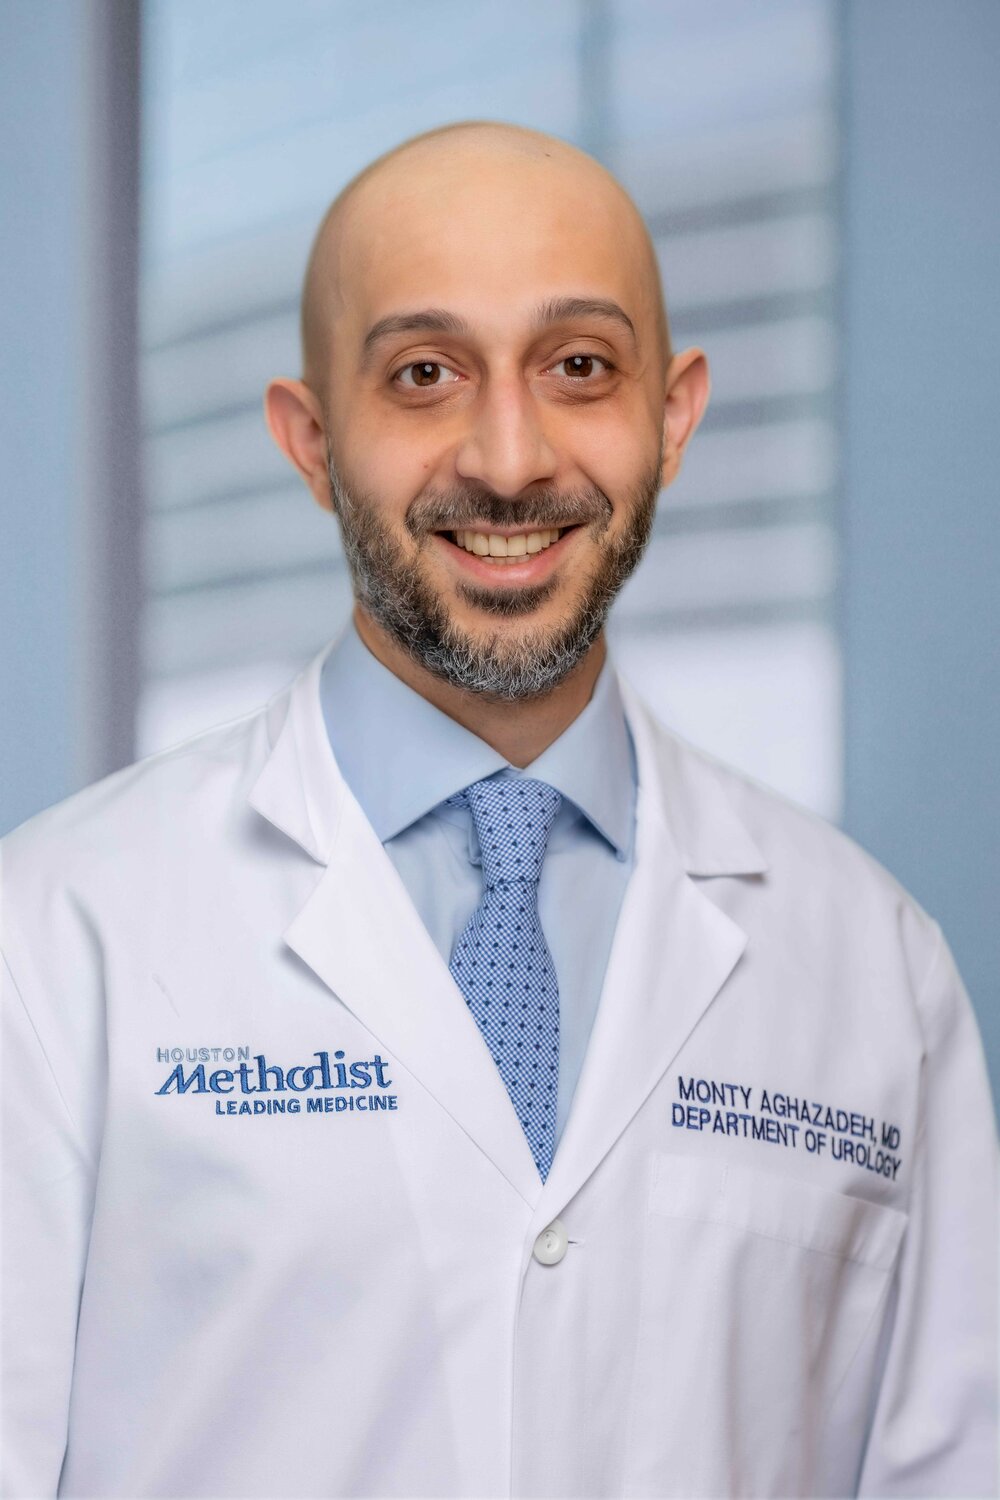 Dr. Monty Aghazadeh